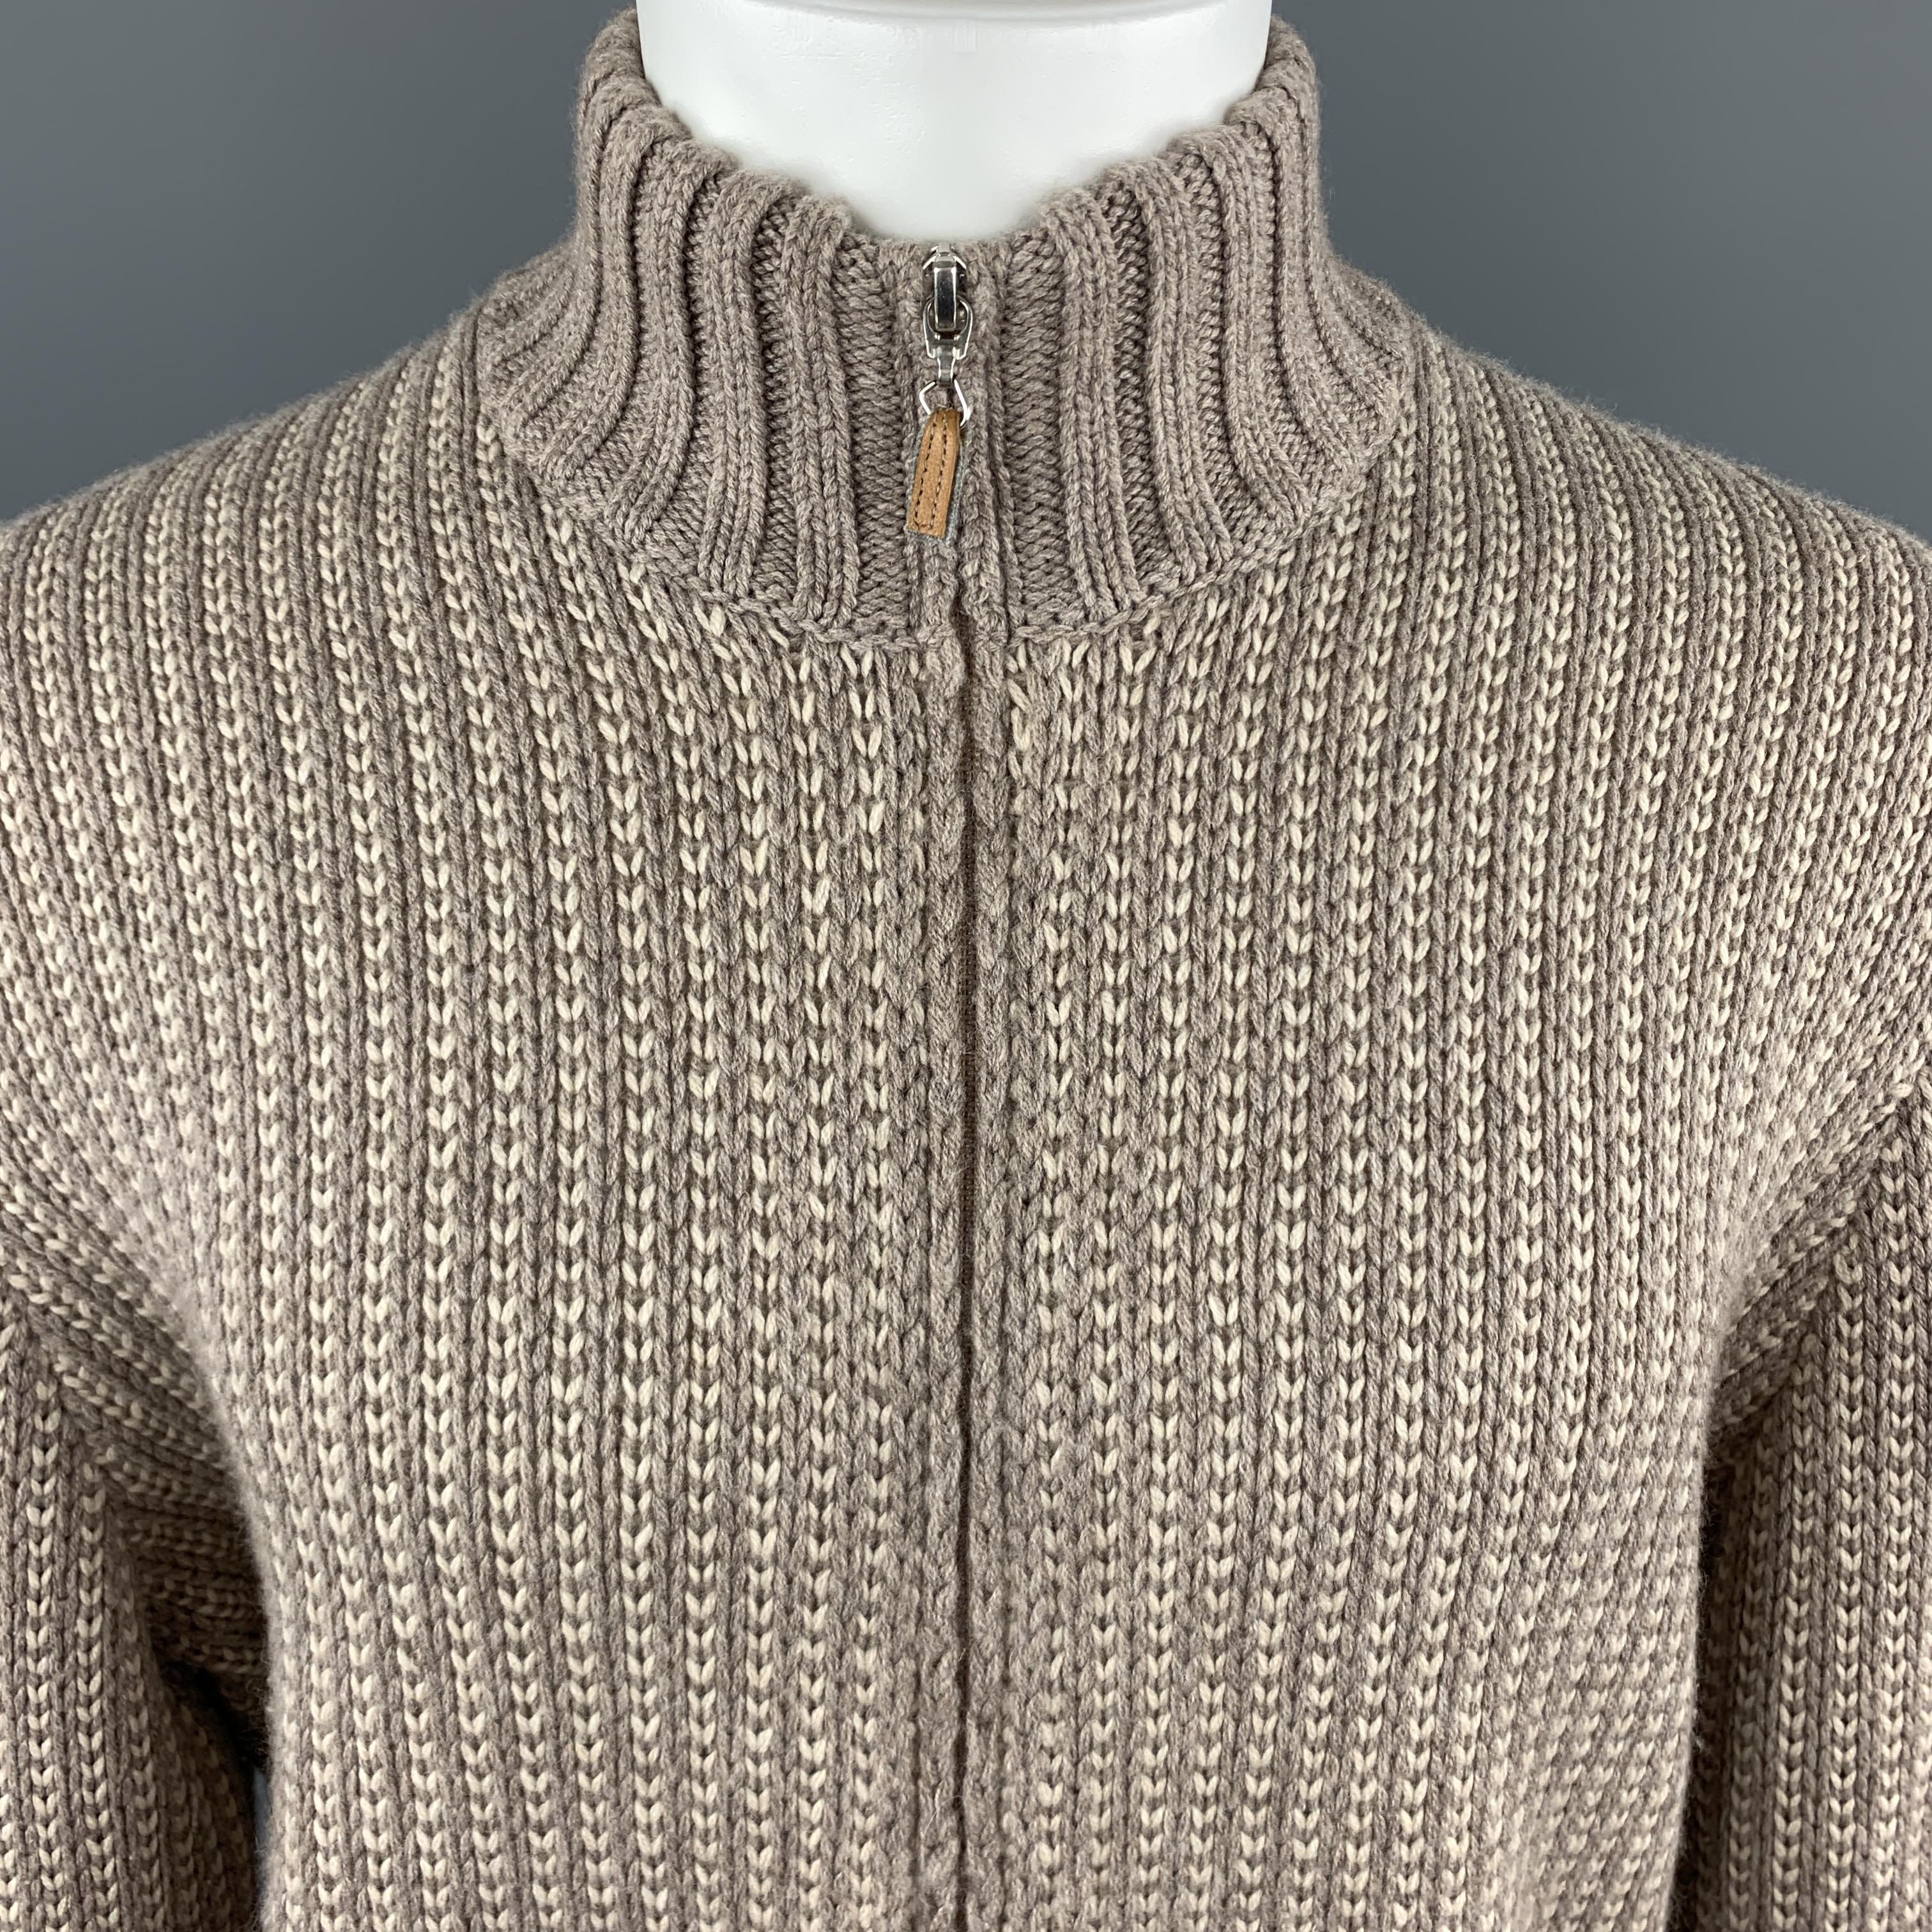 BRUNELLO CUCINELLI cardigan jacket comes in taupe and cream cashmere knit with a high mock neck and double zip front. Made in Italy.

Excellent Pre-Owned Condition.
Marked: IT 52

Measurements:

Shoulder: 17 in.
Chest: 44 in.
Sleeve: 27 in.
Length: